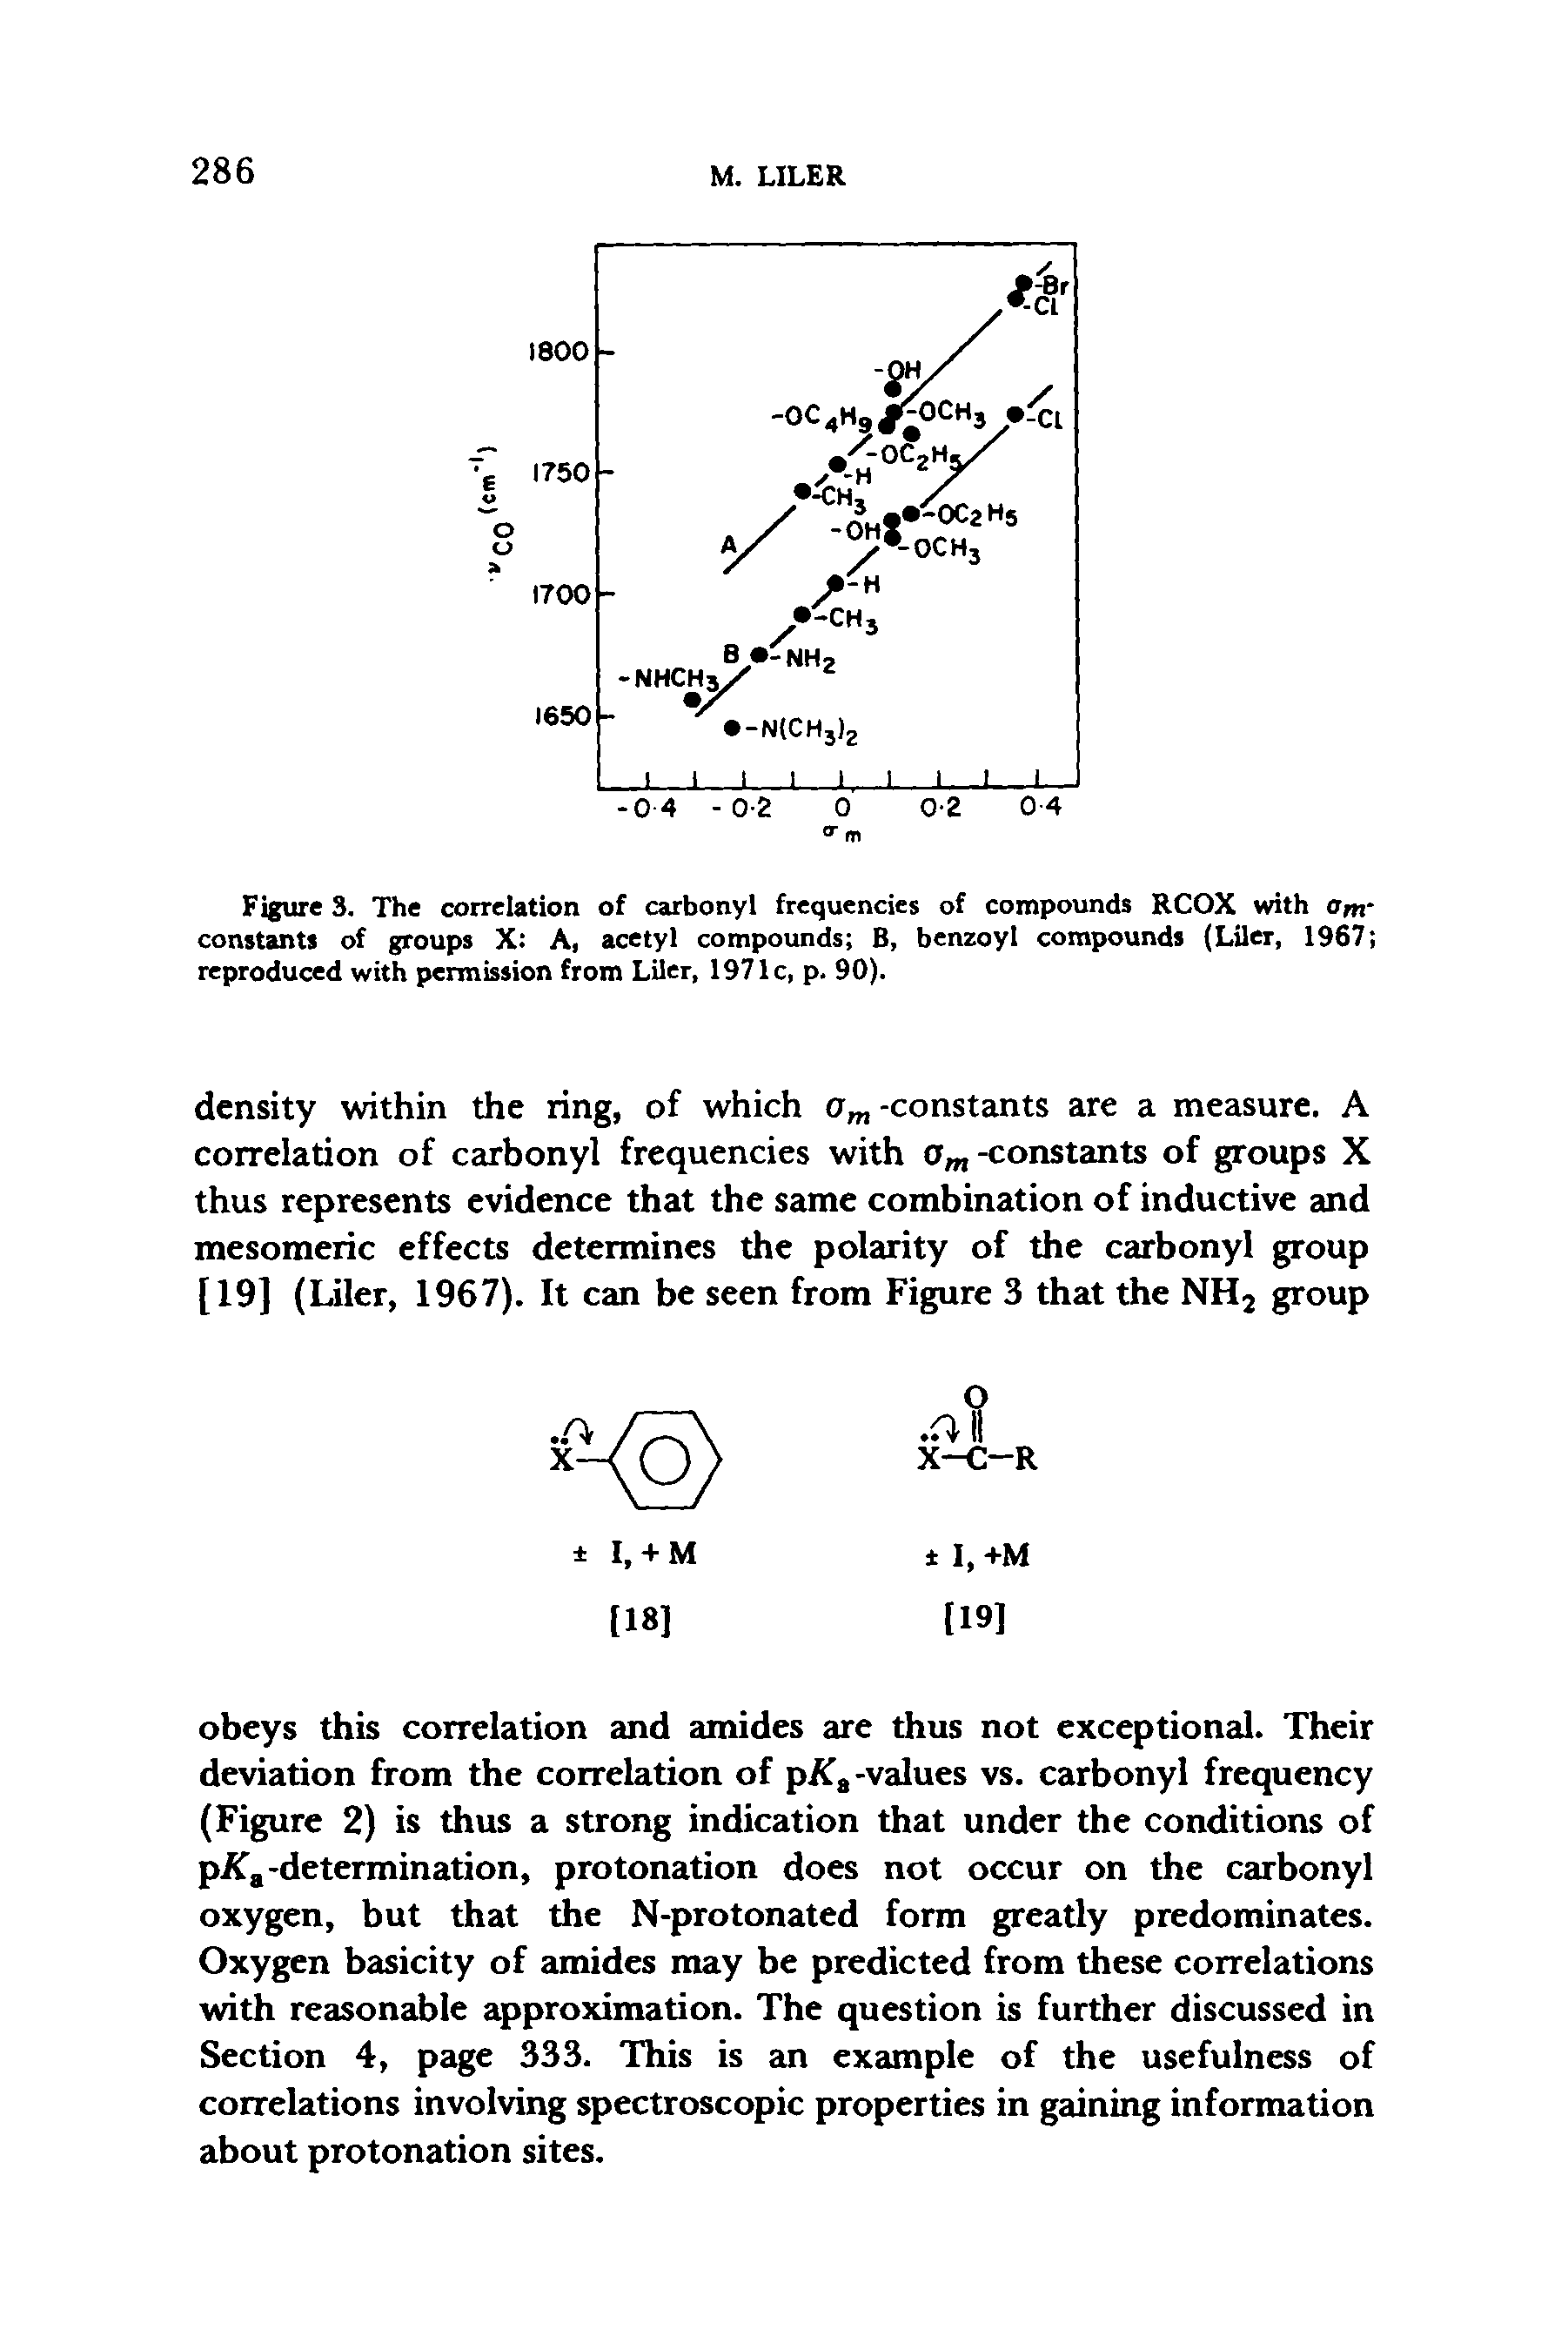 Figure 3. The correlation of carbonyl frequencies of compounds RCOX with om constants of groups X A, acetyl compounds B, benzoyl compounds (Liler, 1967 reproduced with permission from Liler, 1971c, p. 90).